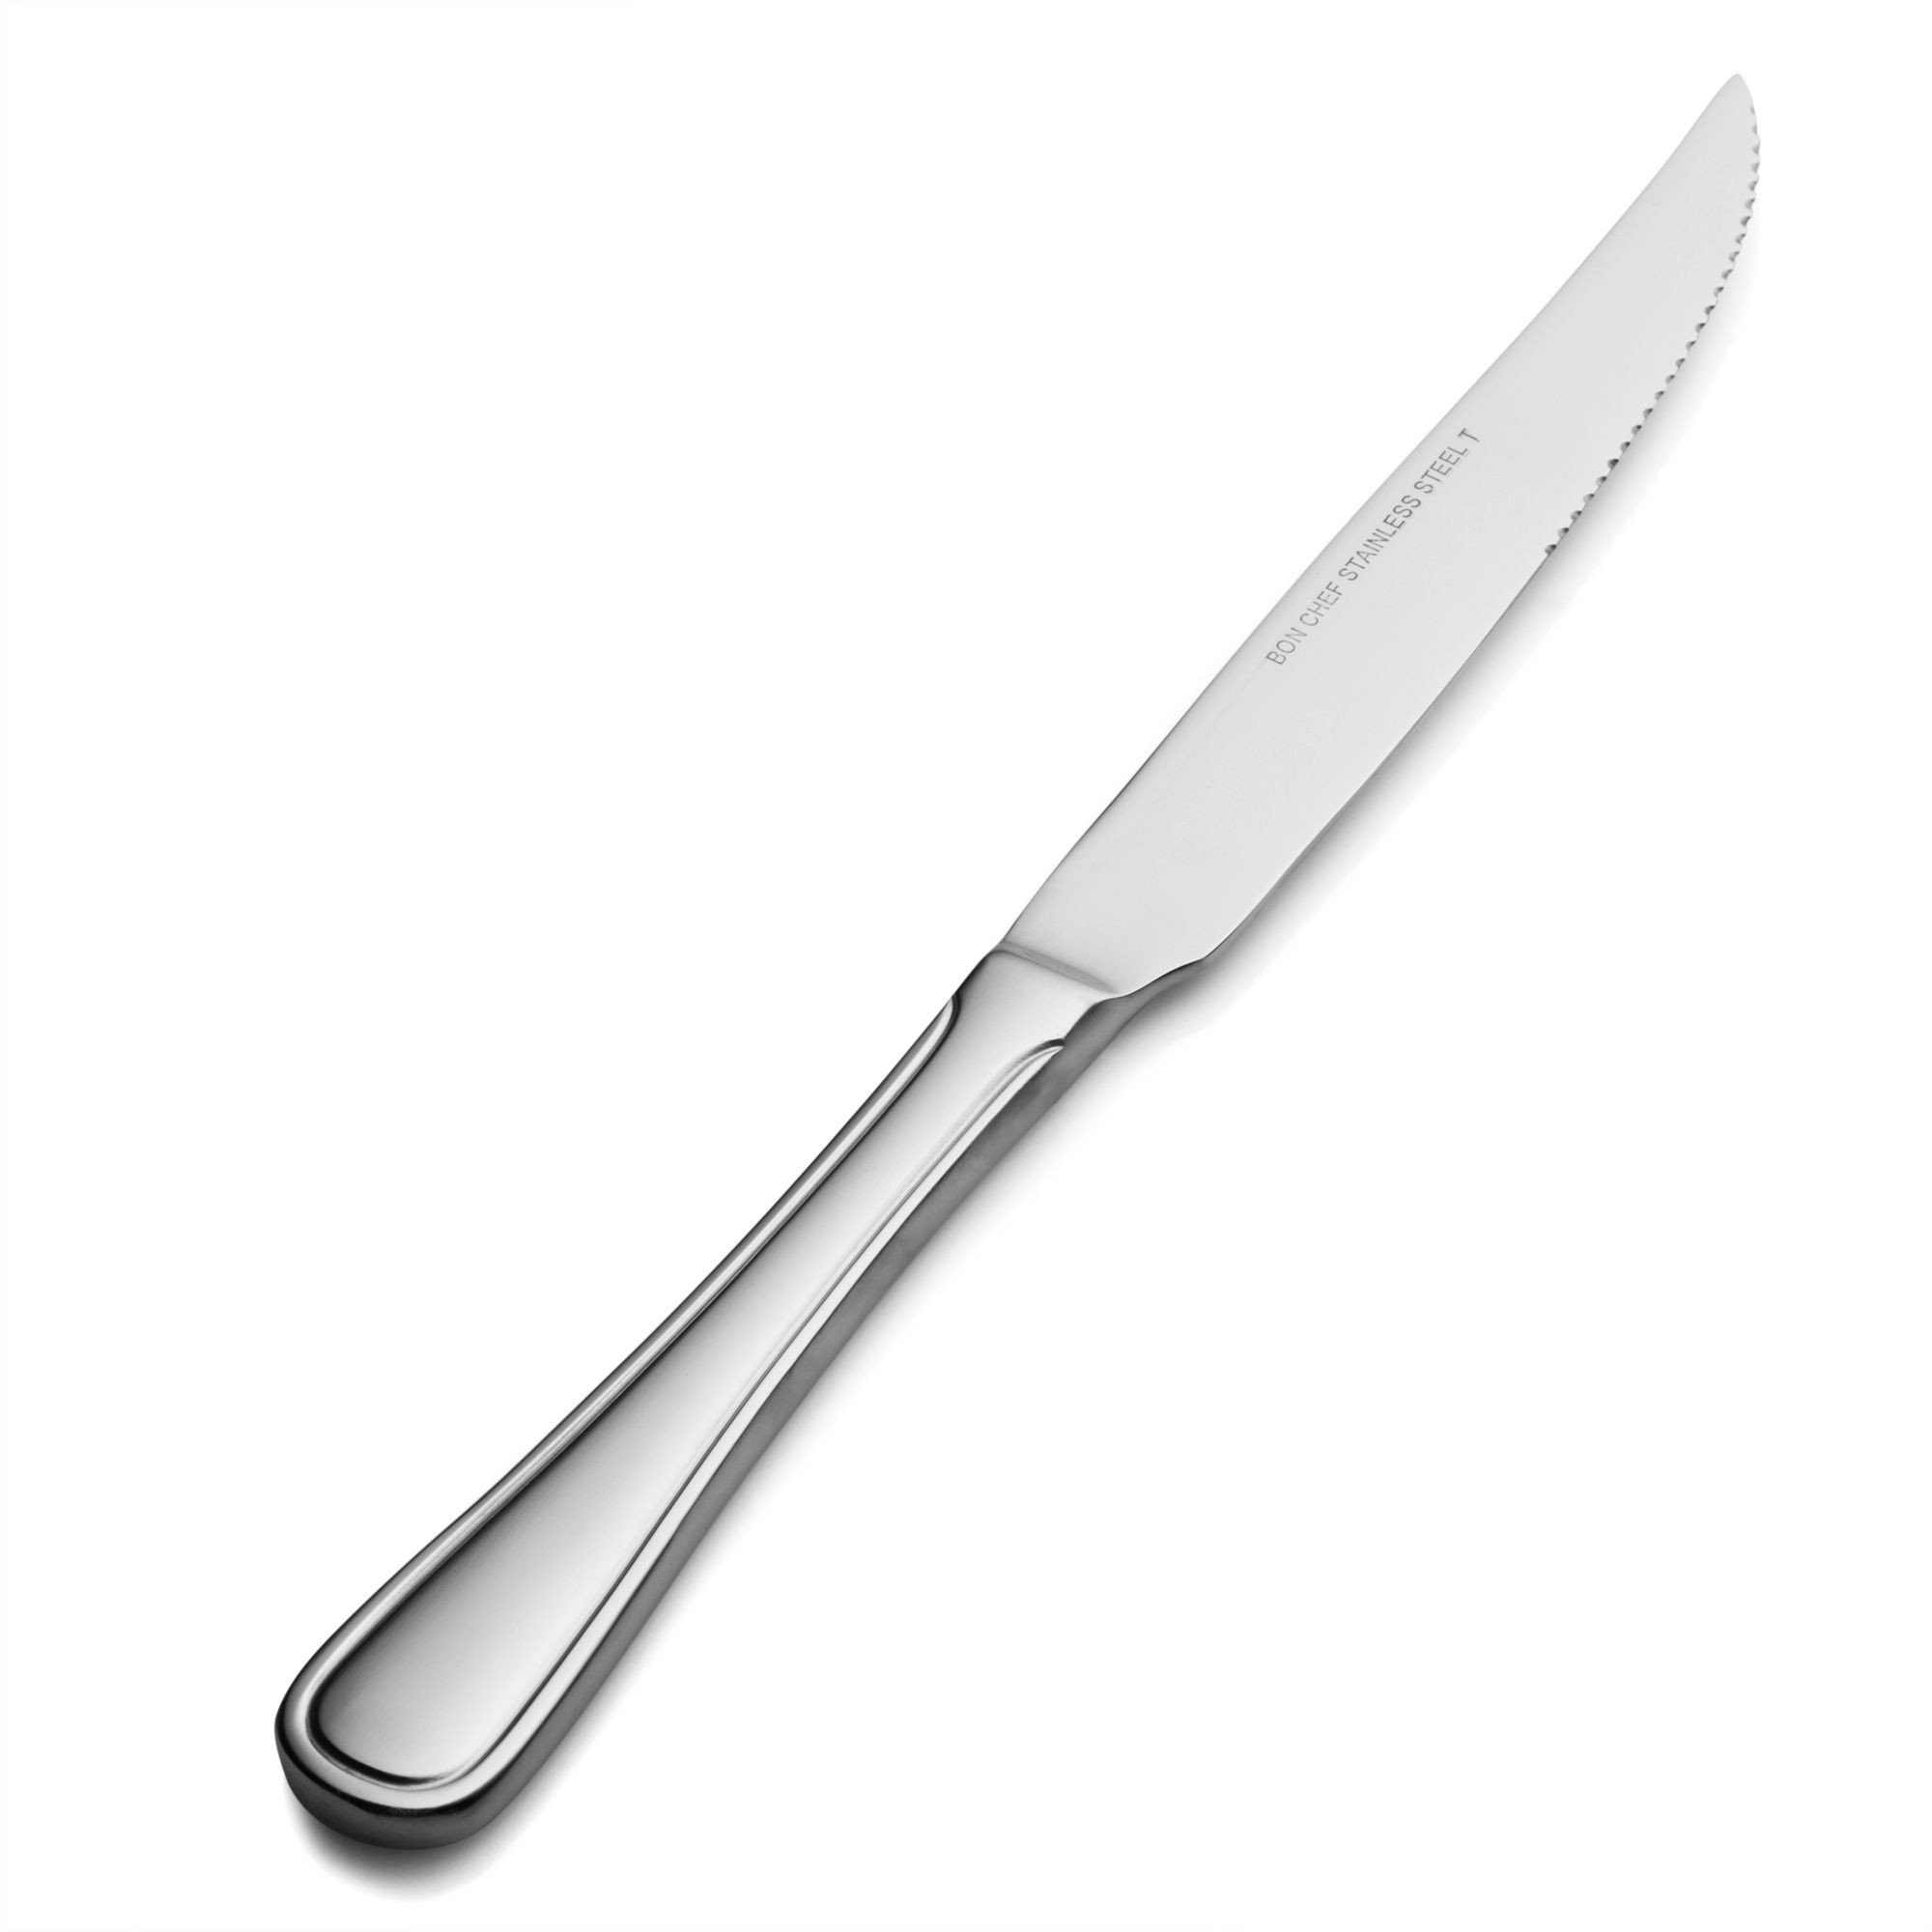 Bon Chef S315 Tuscany 18/8 Stainless Steel European Solid Handle Steak Knife